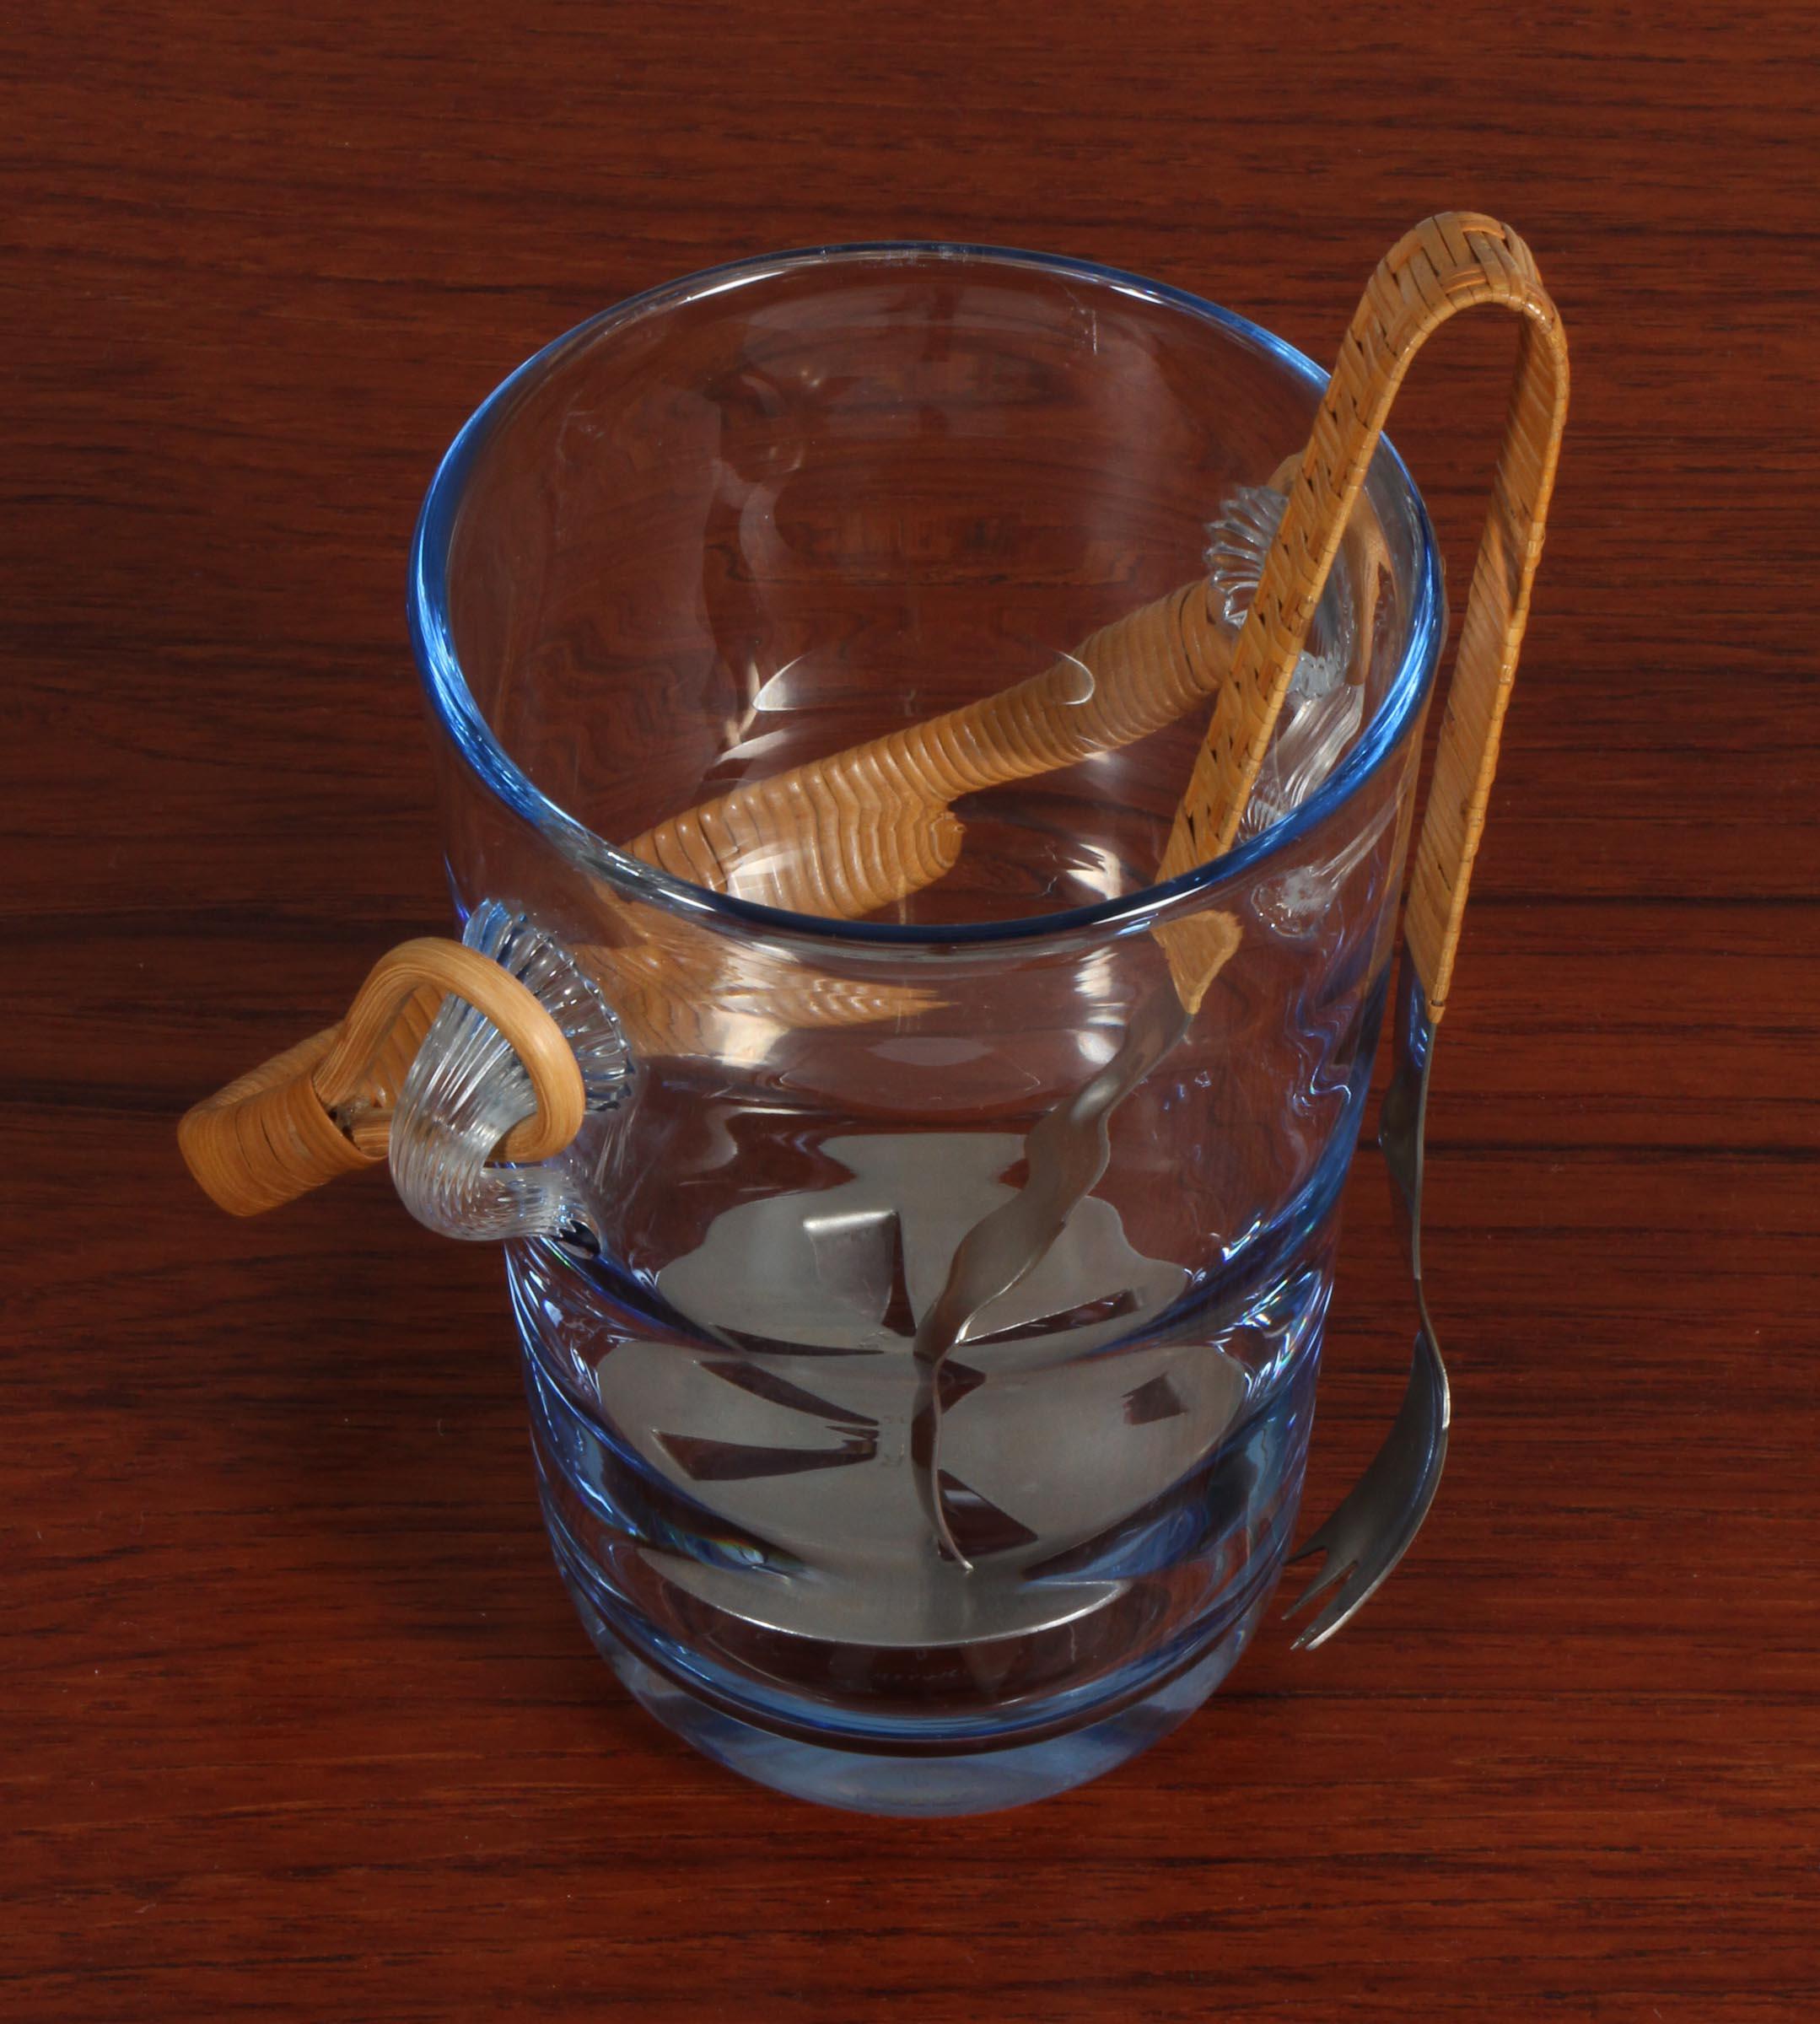 Holmegaard ice bucket in glass with cane handle.

Made by Holmegaard in the 1960s.